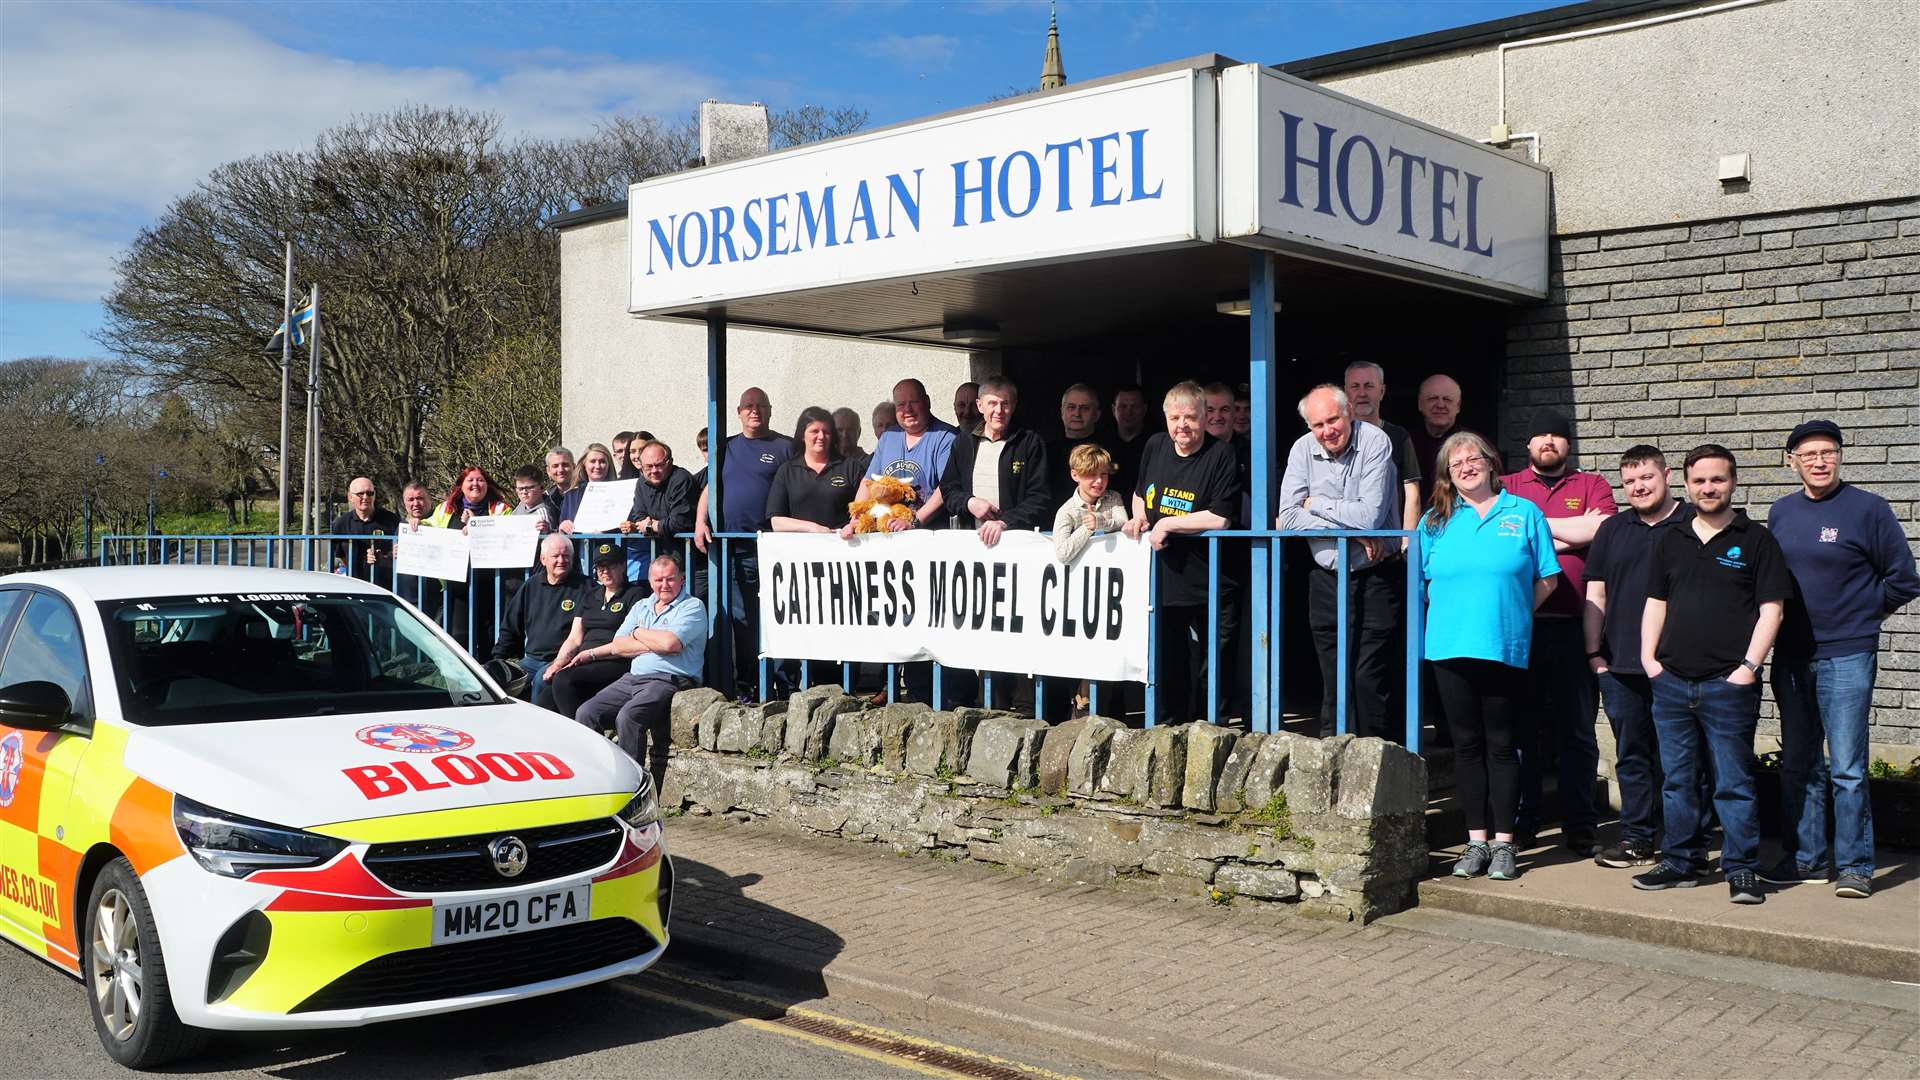 Members and exhibitors from the Caithness Model Club show at the Norseman Hotel on Sunday. Also present are recipients of the charity cheques given out. Picture: DGS